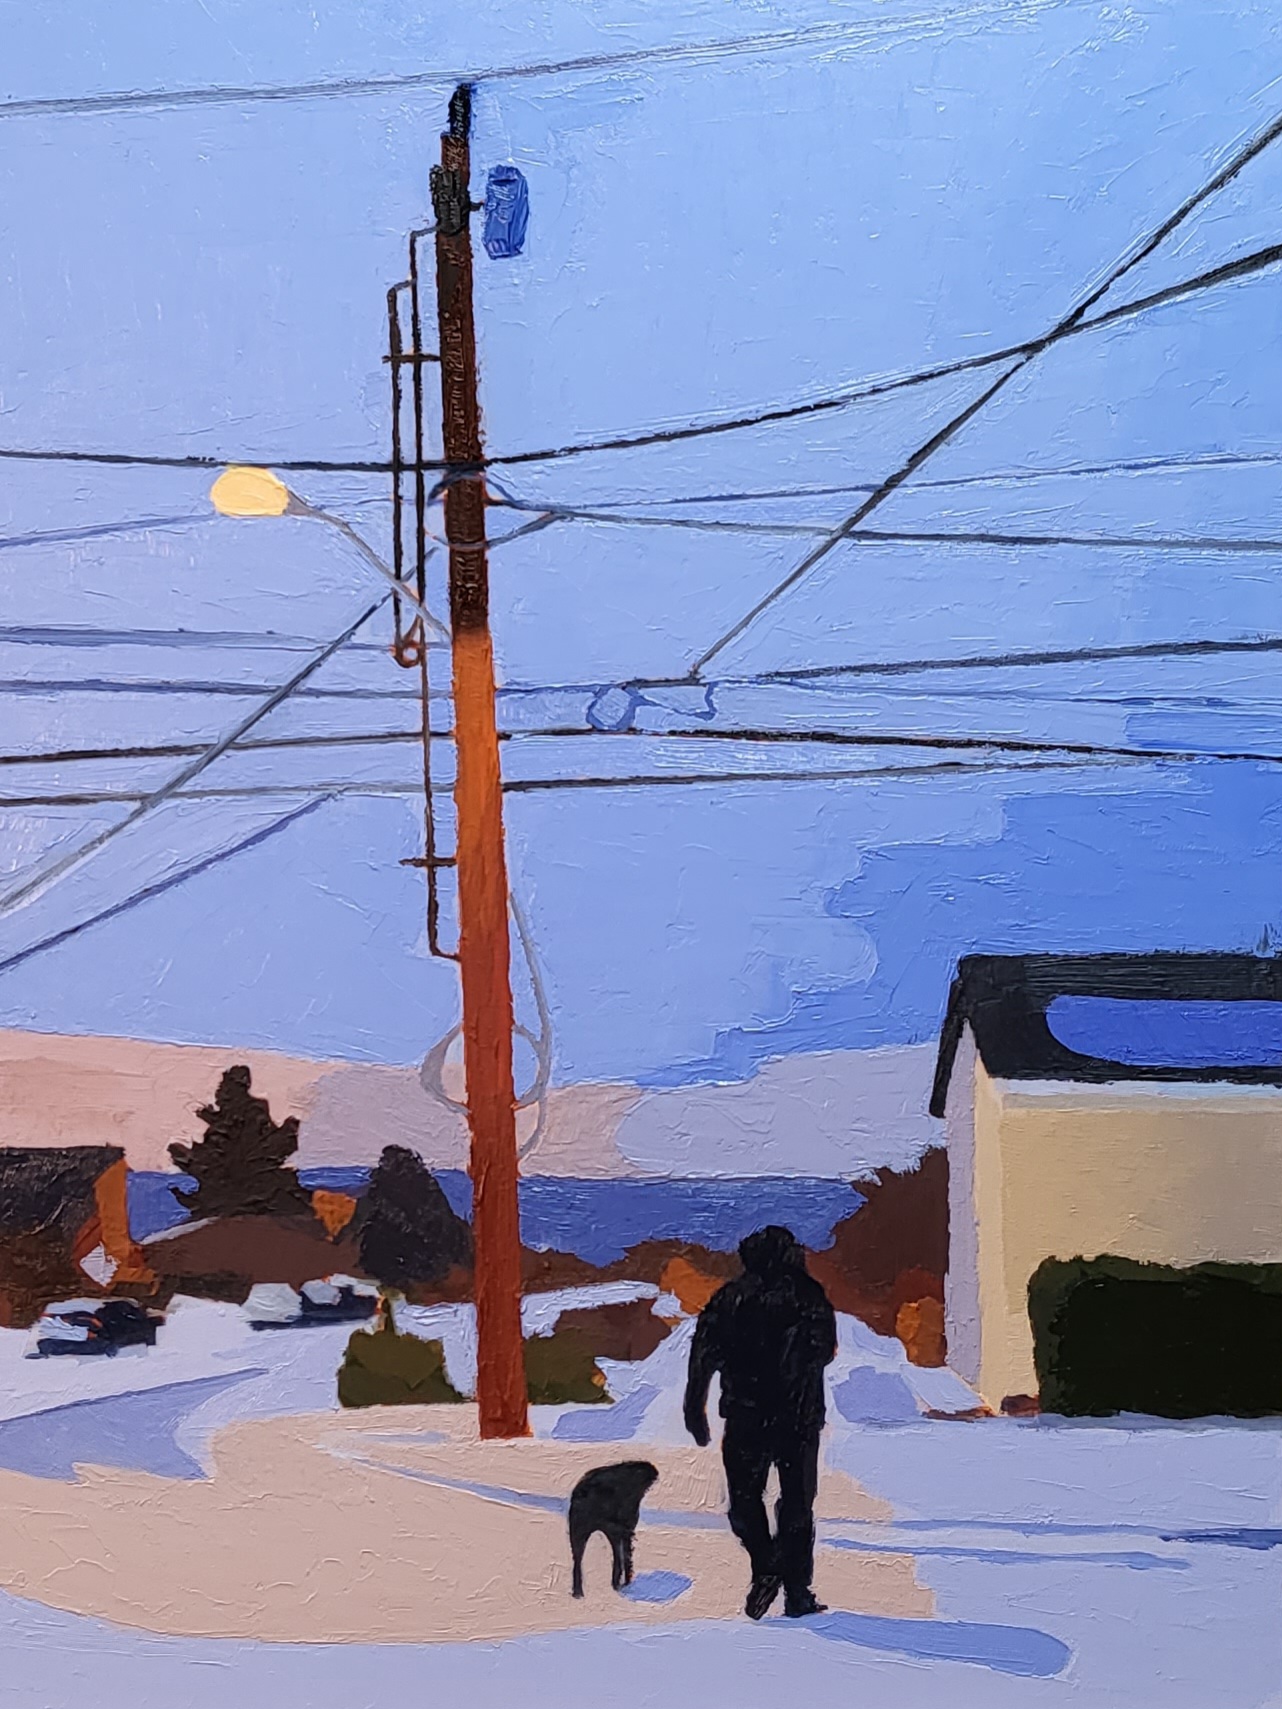 a silhouetted figure walking a dog on snow covered streets at dusk with a street light and telephone wires crisscrossing the sky